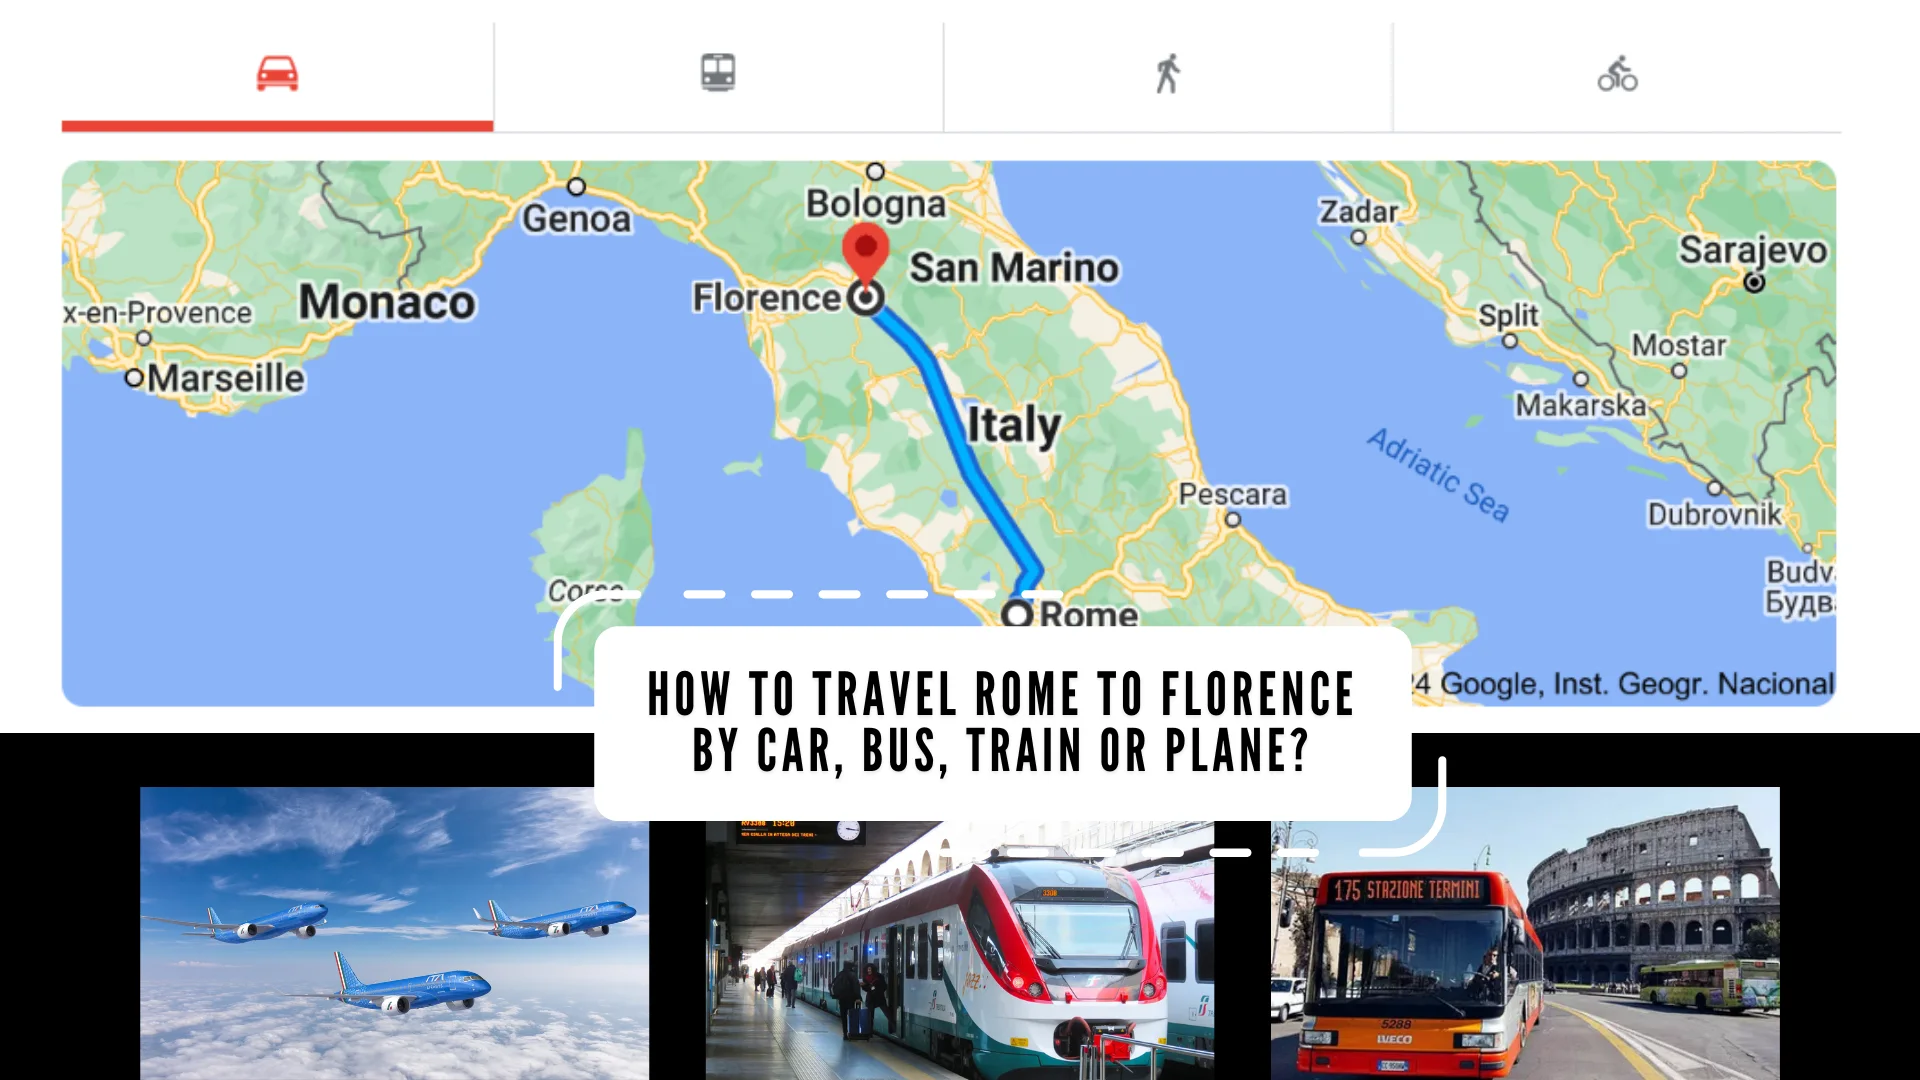 How-to-Travel-Rome-to-Florence-by-Car-Bus-Train-or-Plane.webp